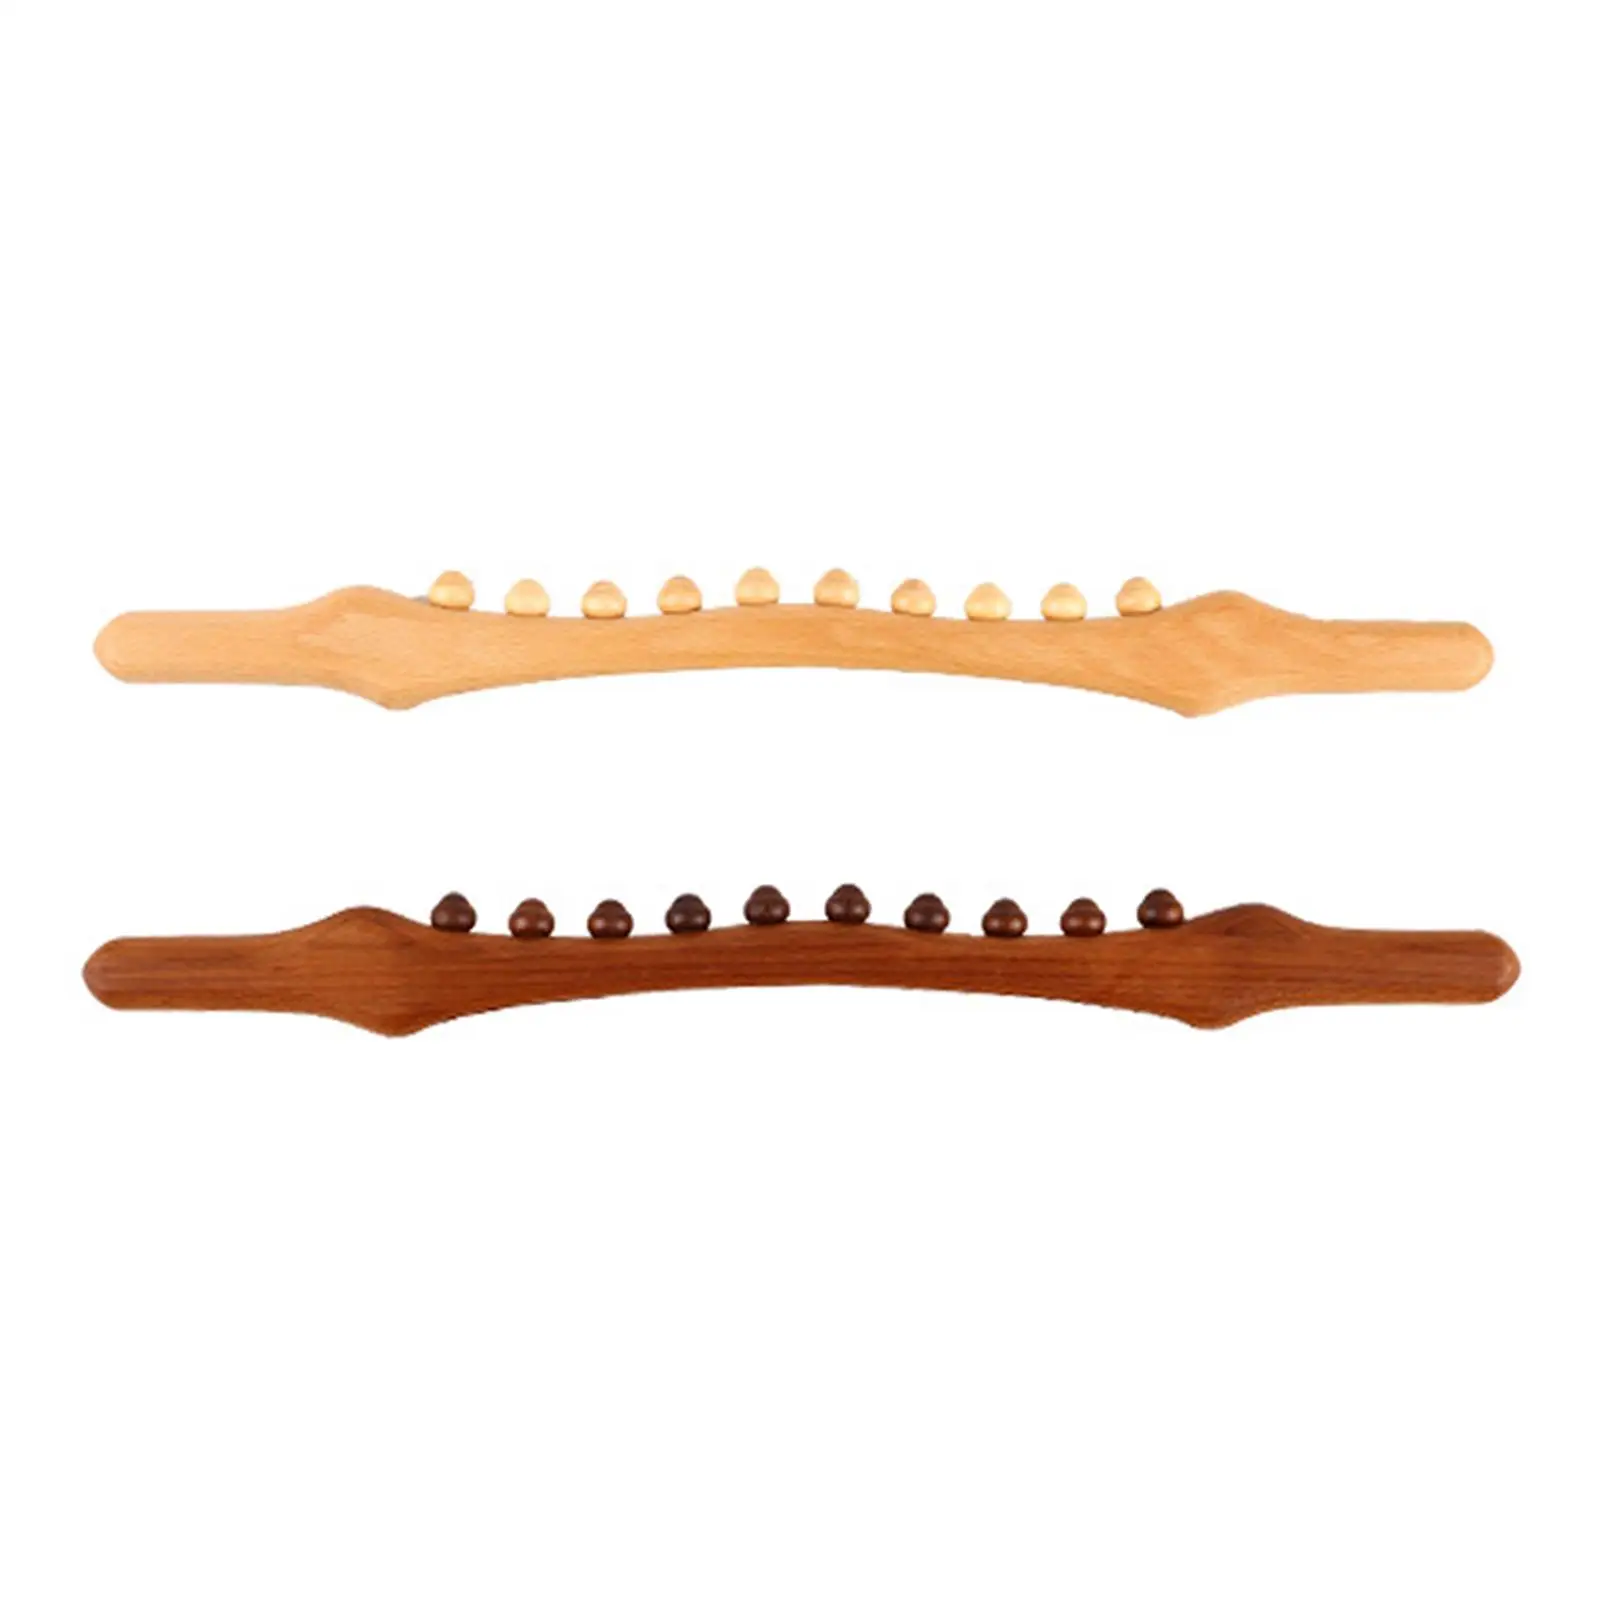 Wooden Guasha Scraping Stick Massage Tools 10 Beads Relaxing Lymphatic Drainage Tool for Back